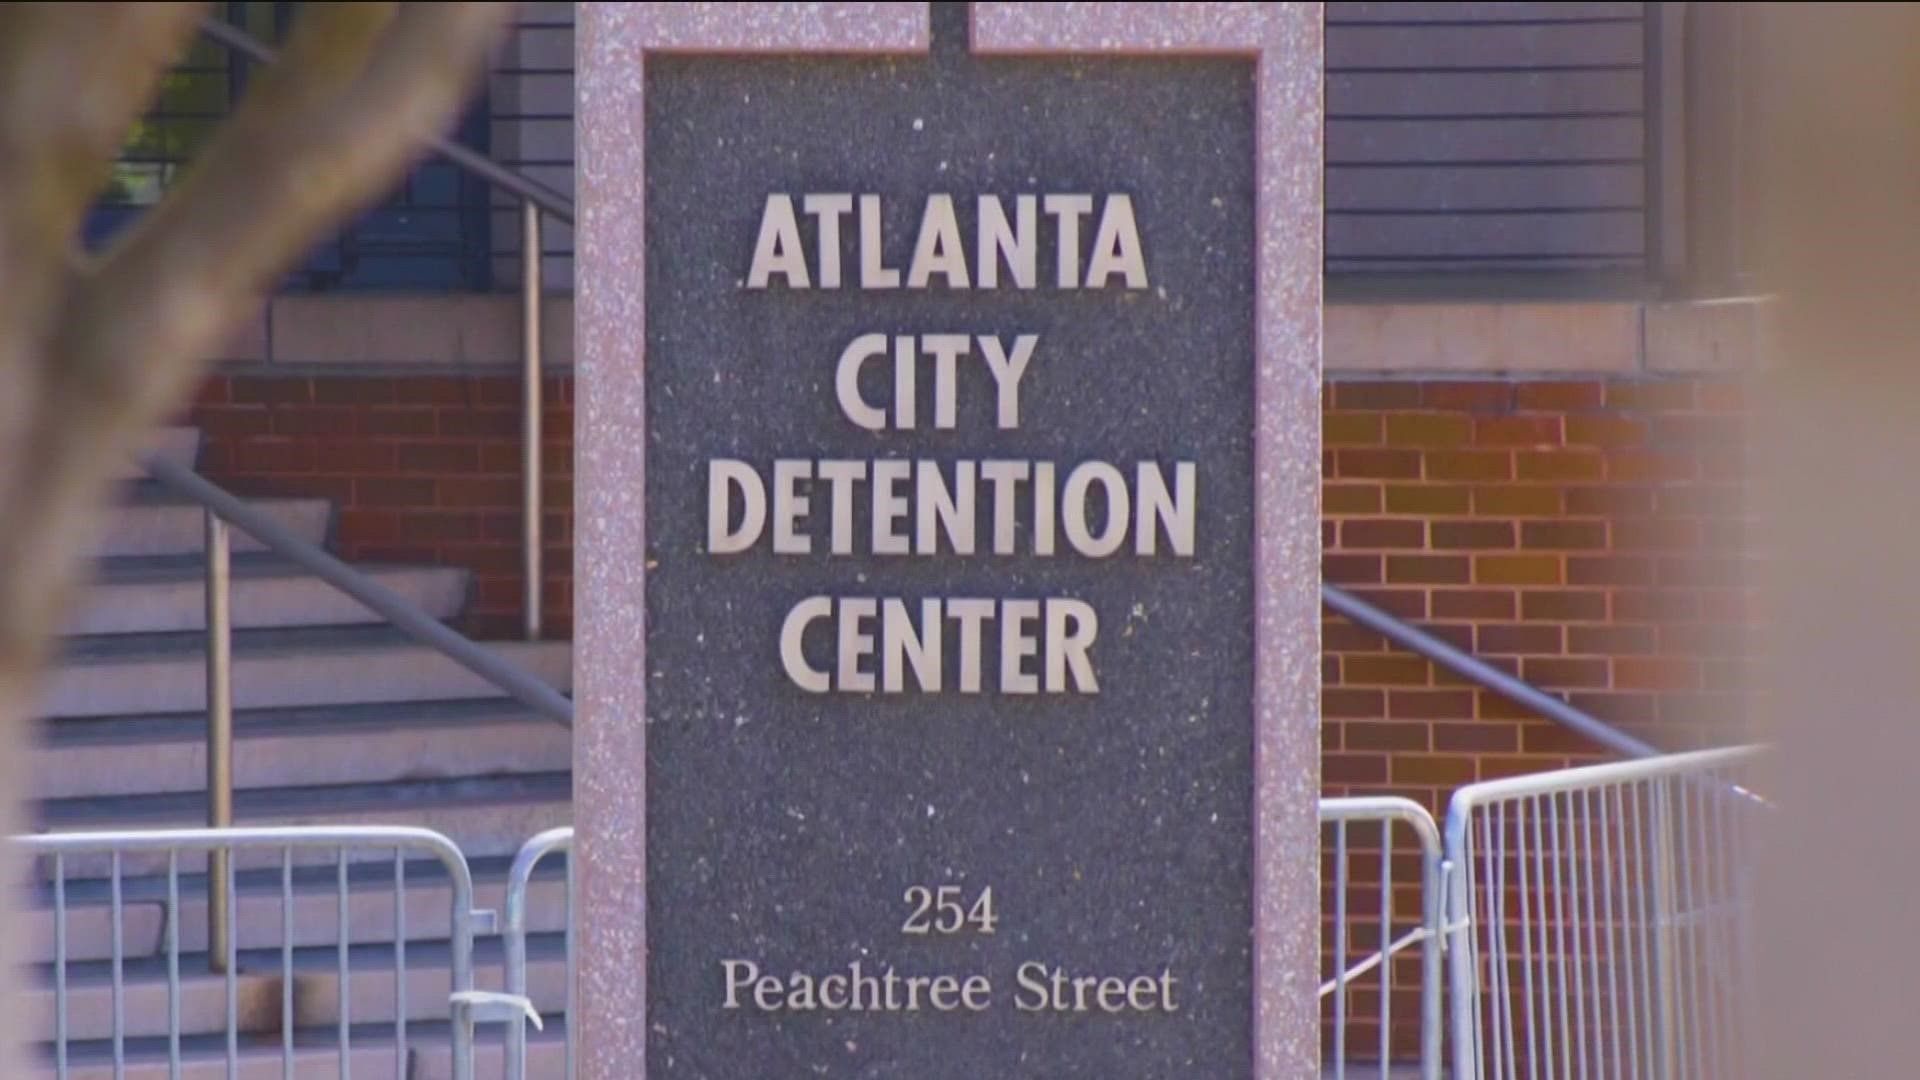 The Atlanta City council is expected to vote Monday to lease the Atlanta Detention Center to the Fulton County Sheriff's Office.